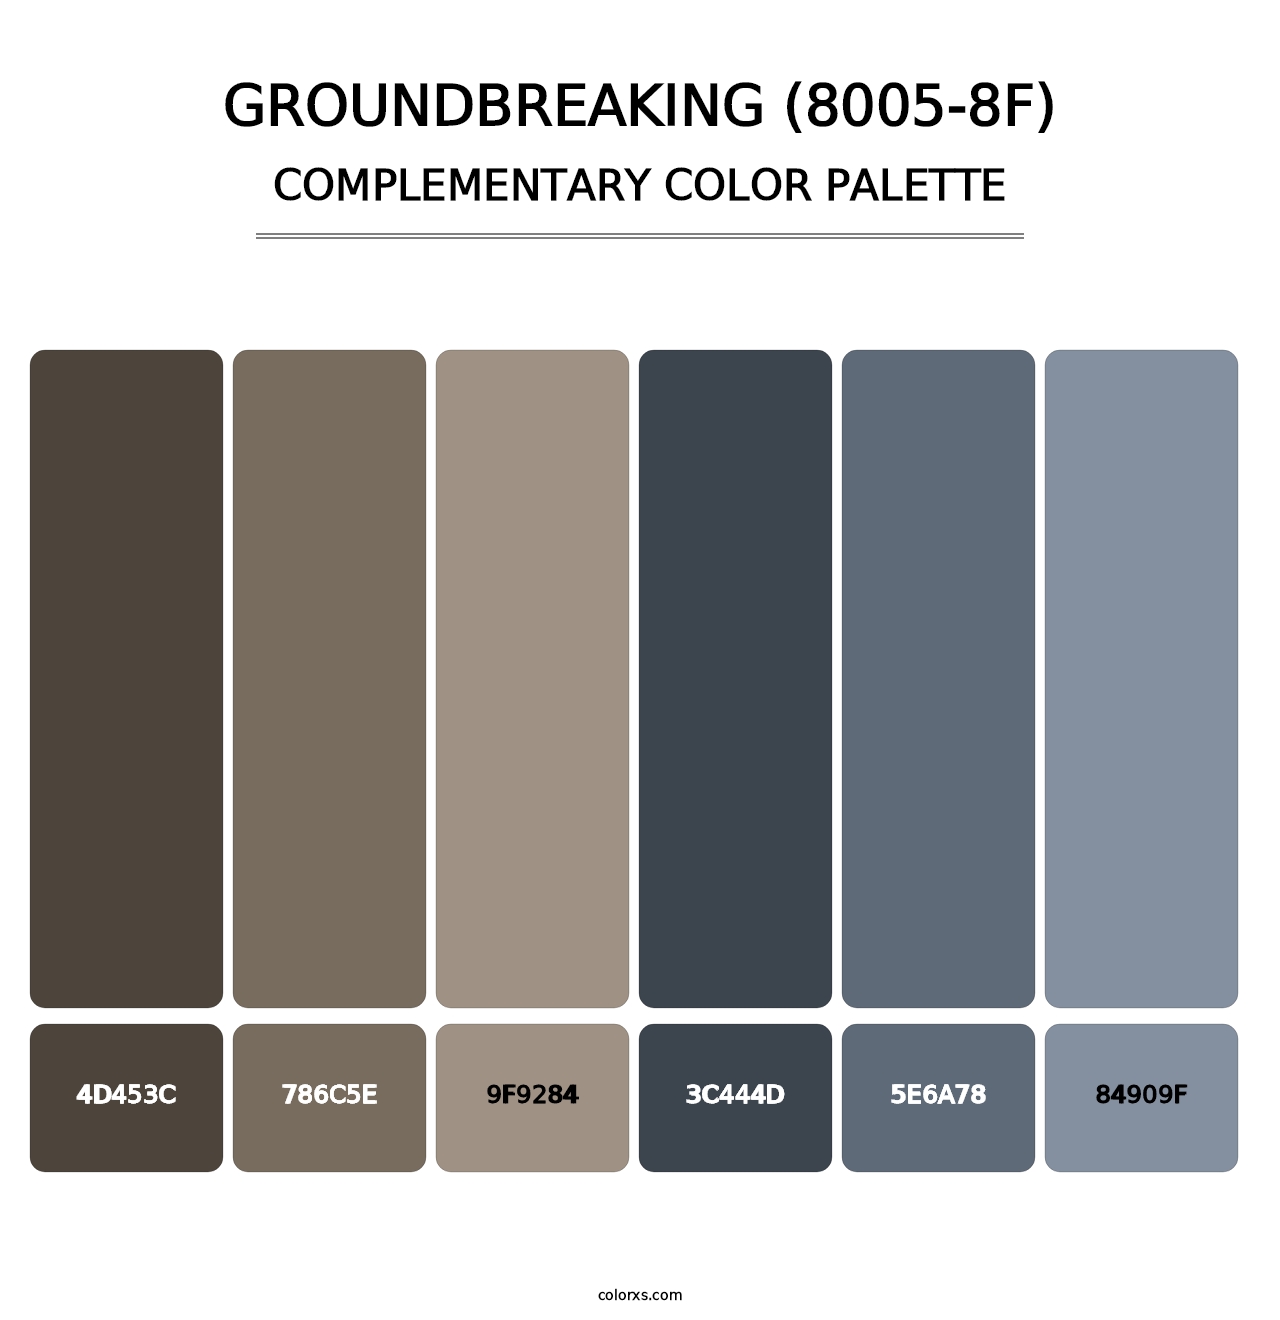 Groundbreaking (8005-8F) - Complementary Color Palette